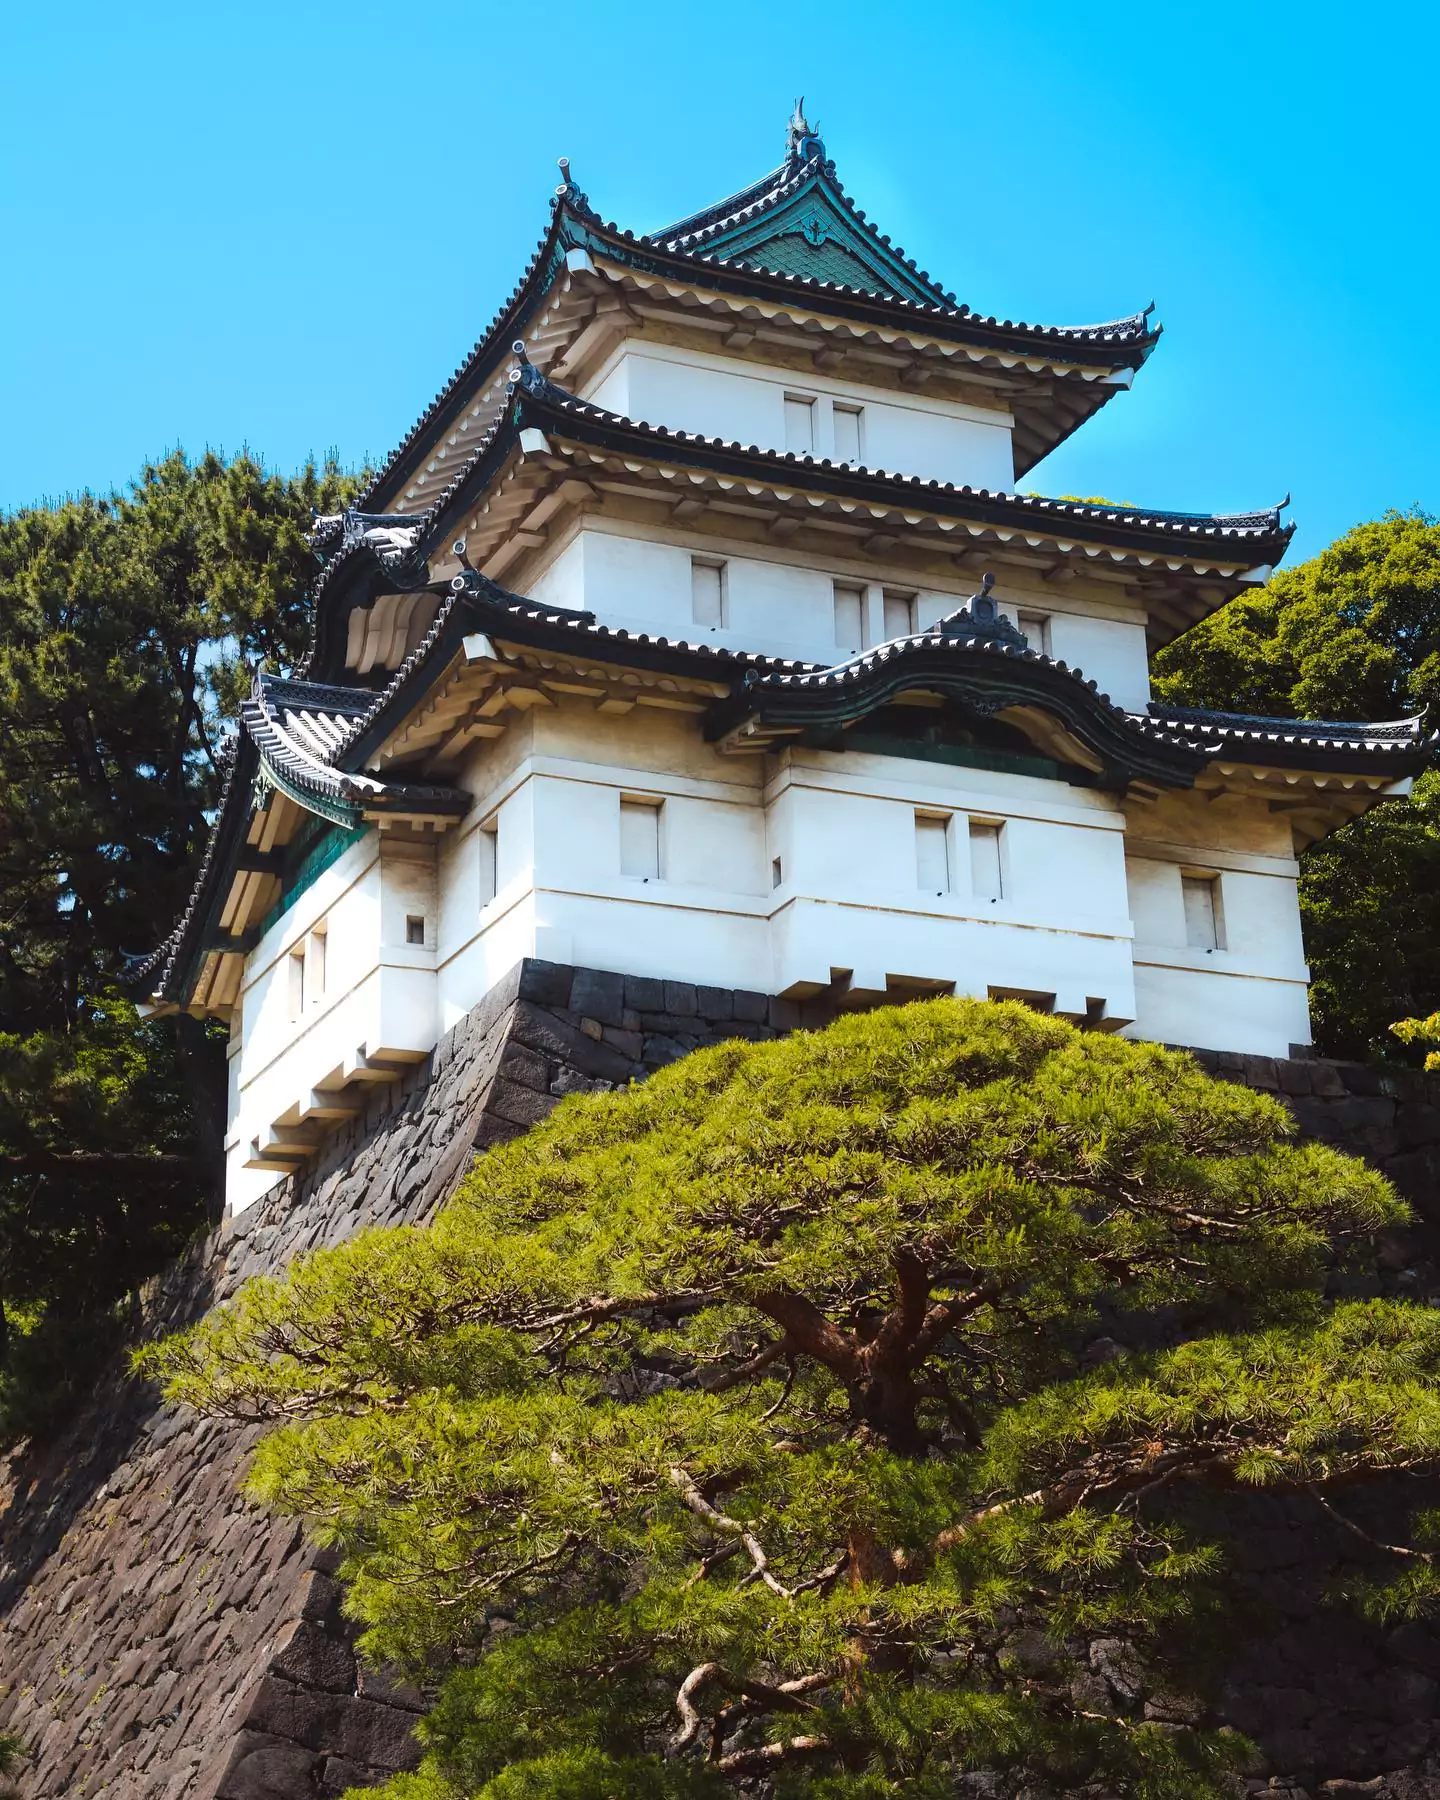 Tour the Imperial Palace